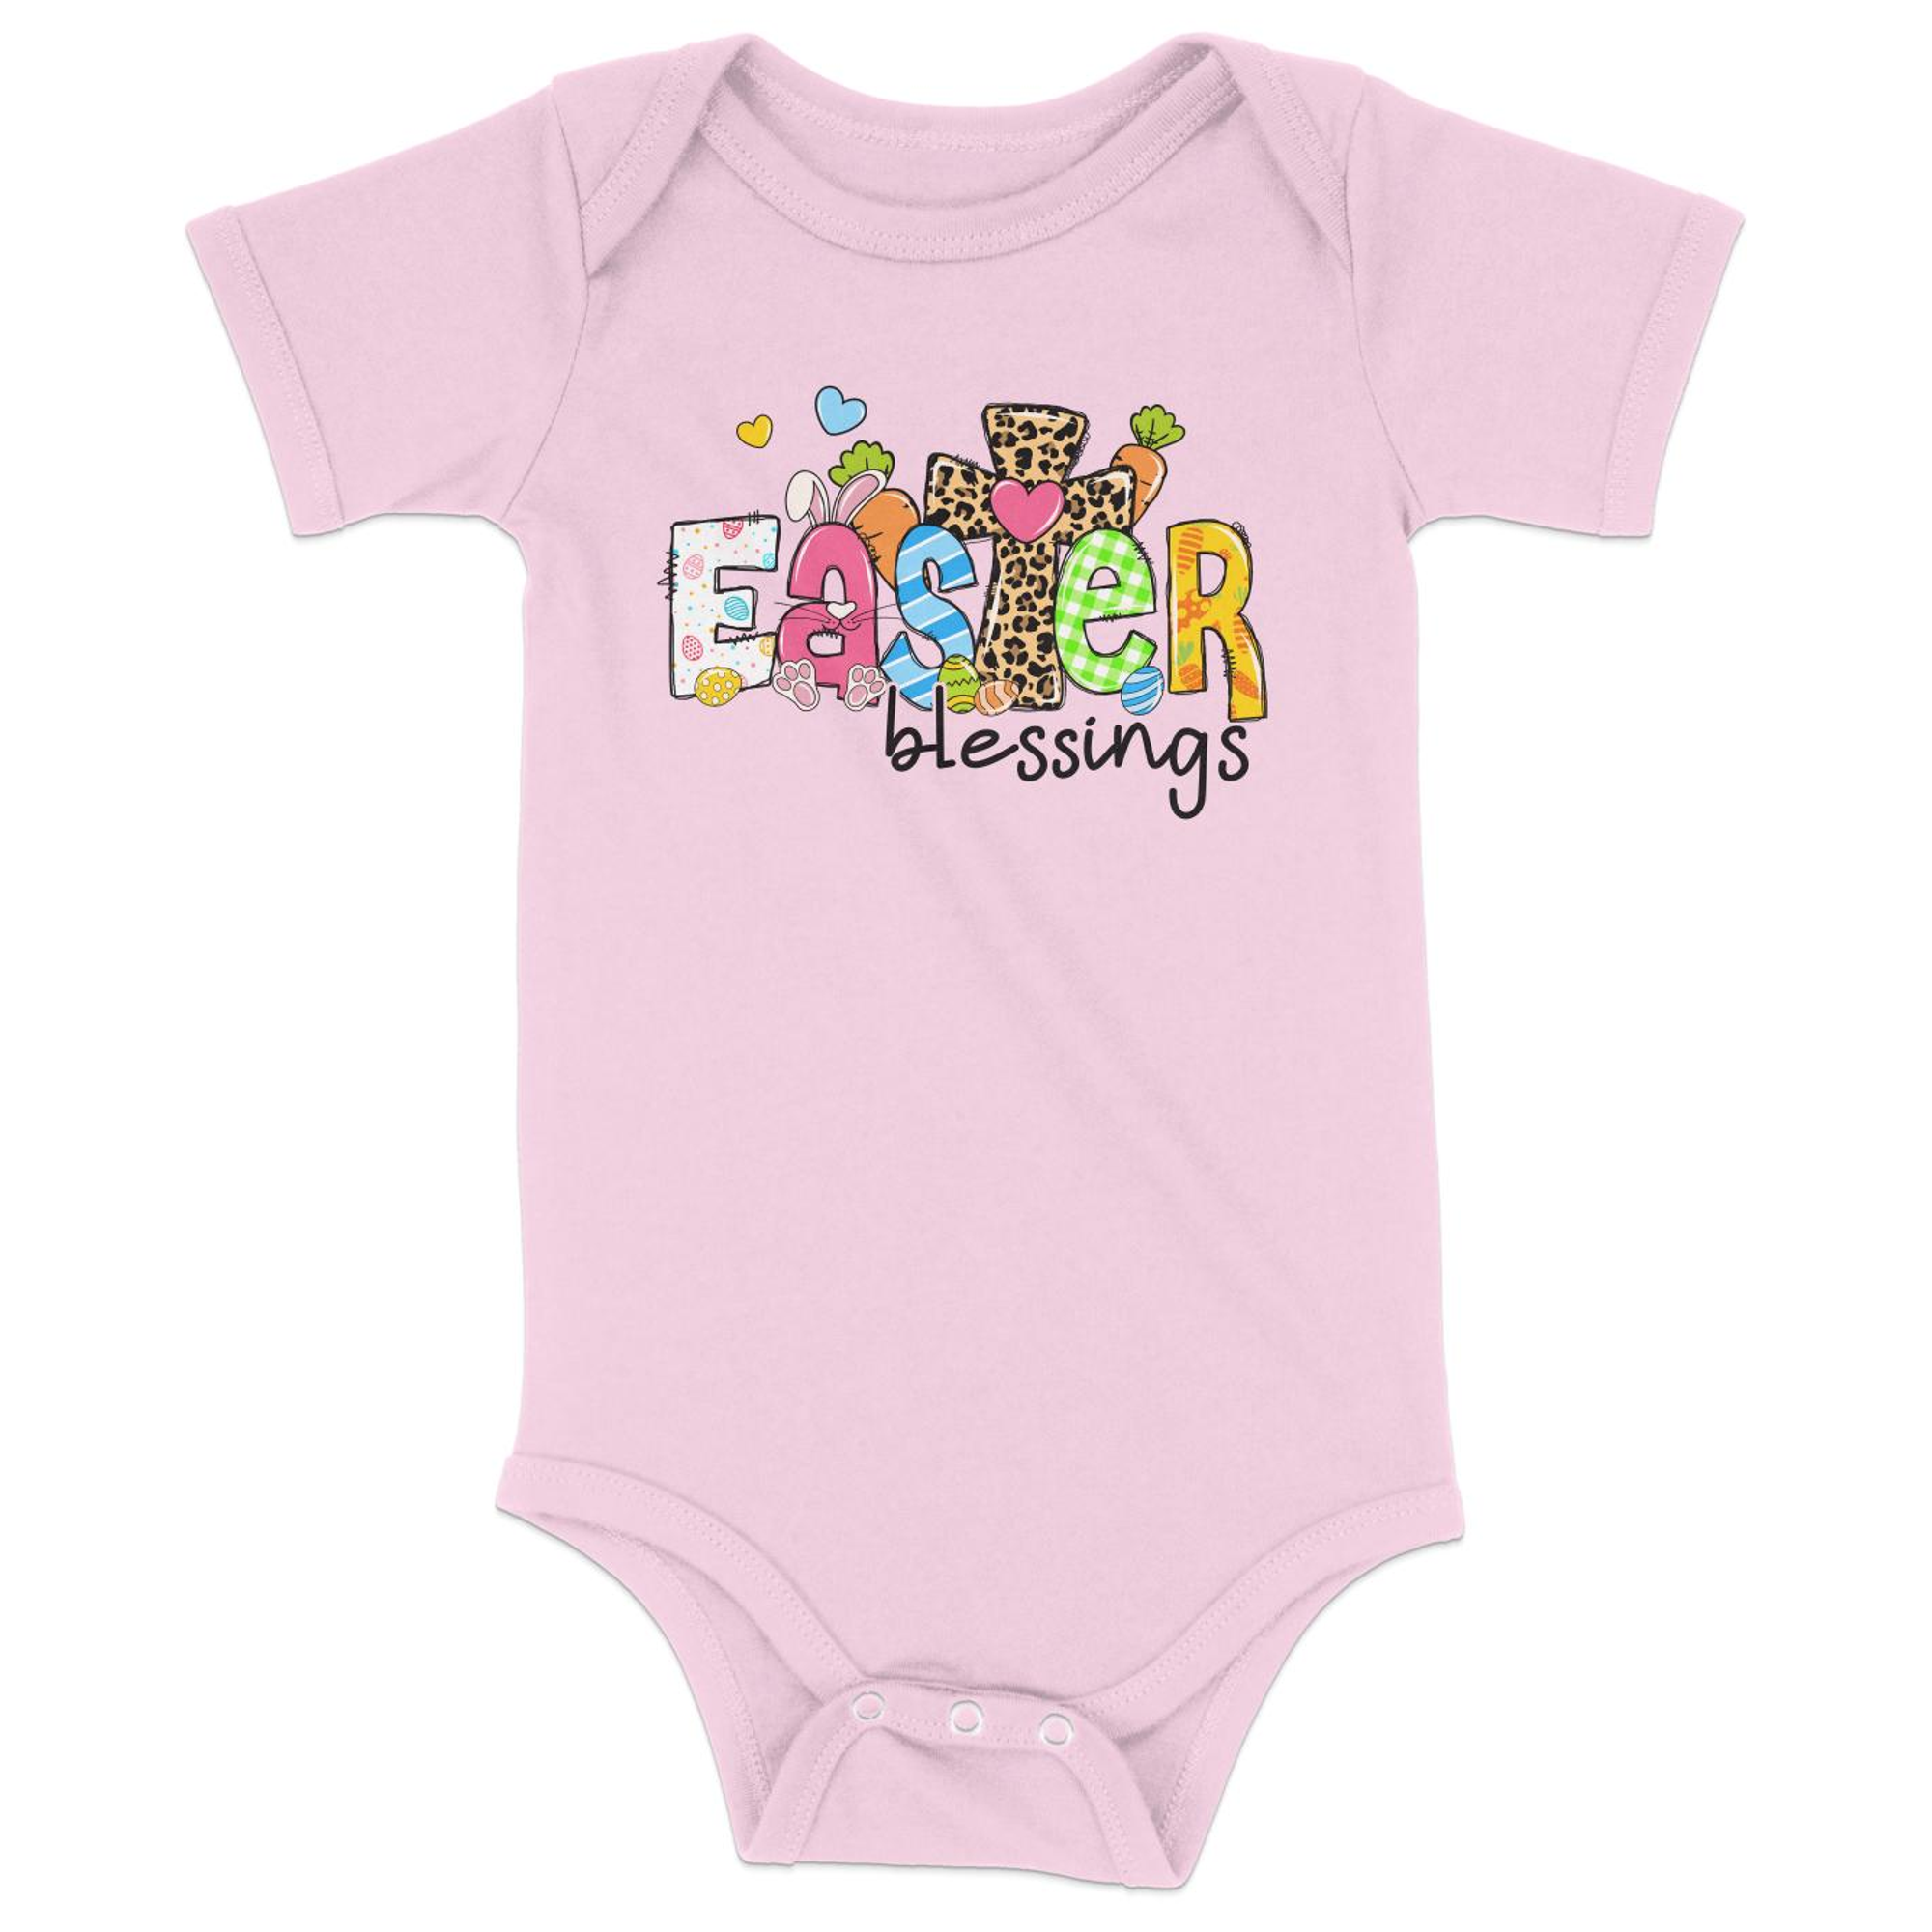 Easter Blessings Infant Fine Jersey Bodysuit Size: 6mo Color: Pink Jesus Passion Apparel